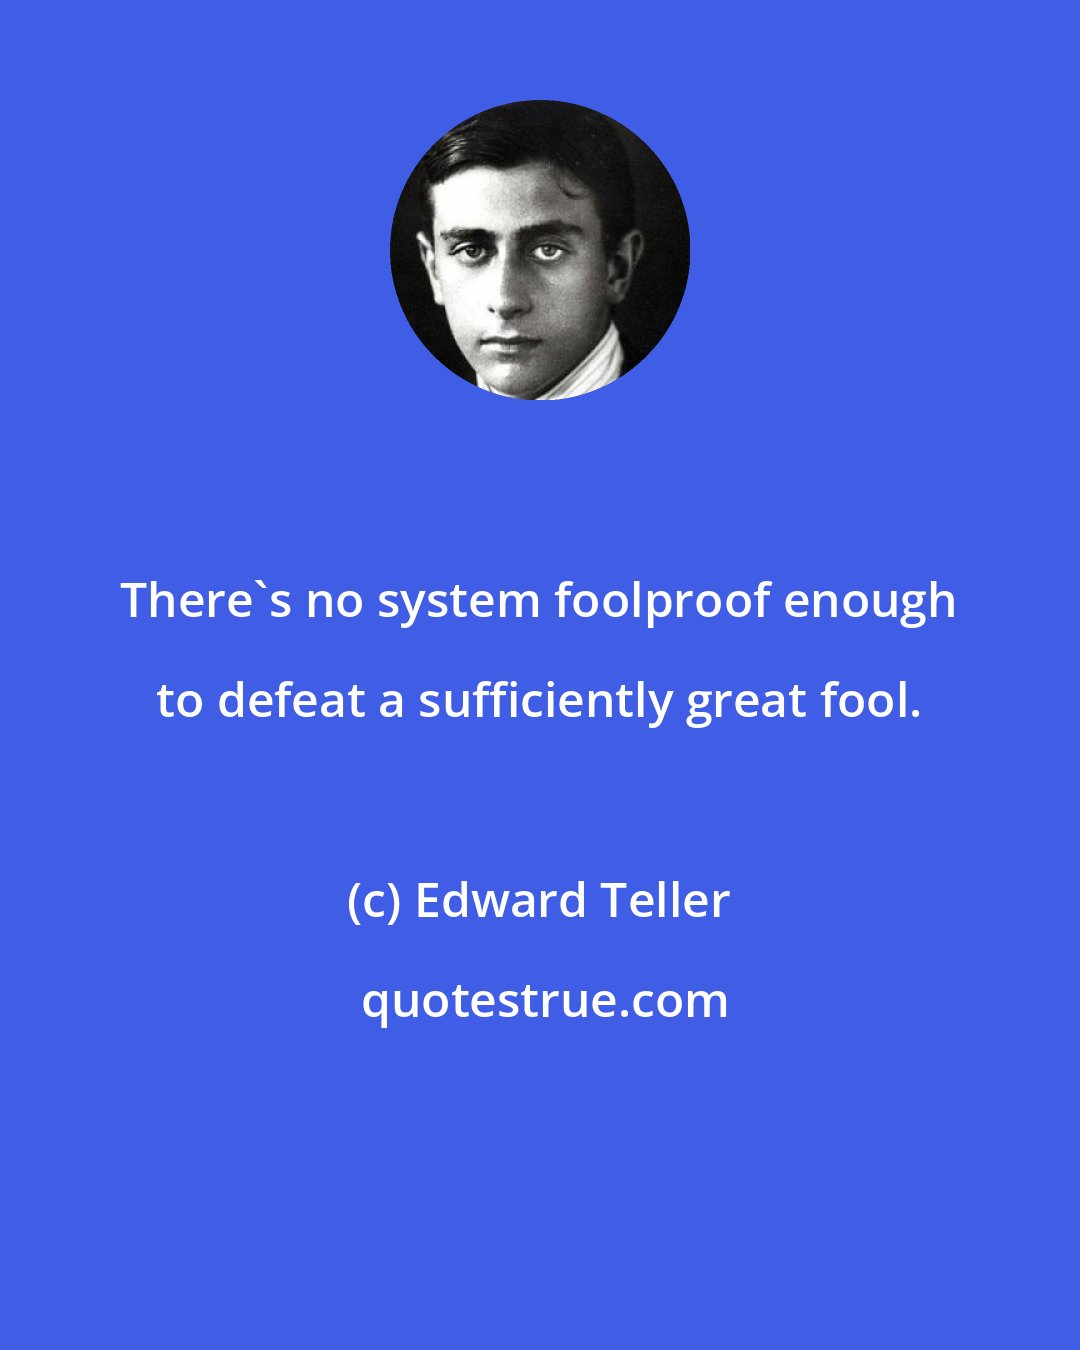 Edward Teller: There's no system foolproof enough to defeat a sufficiently great fool.